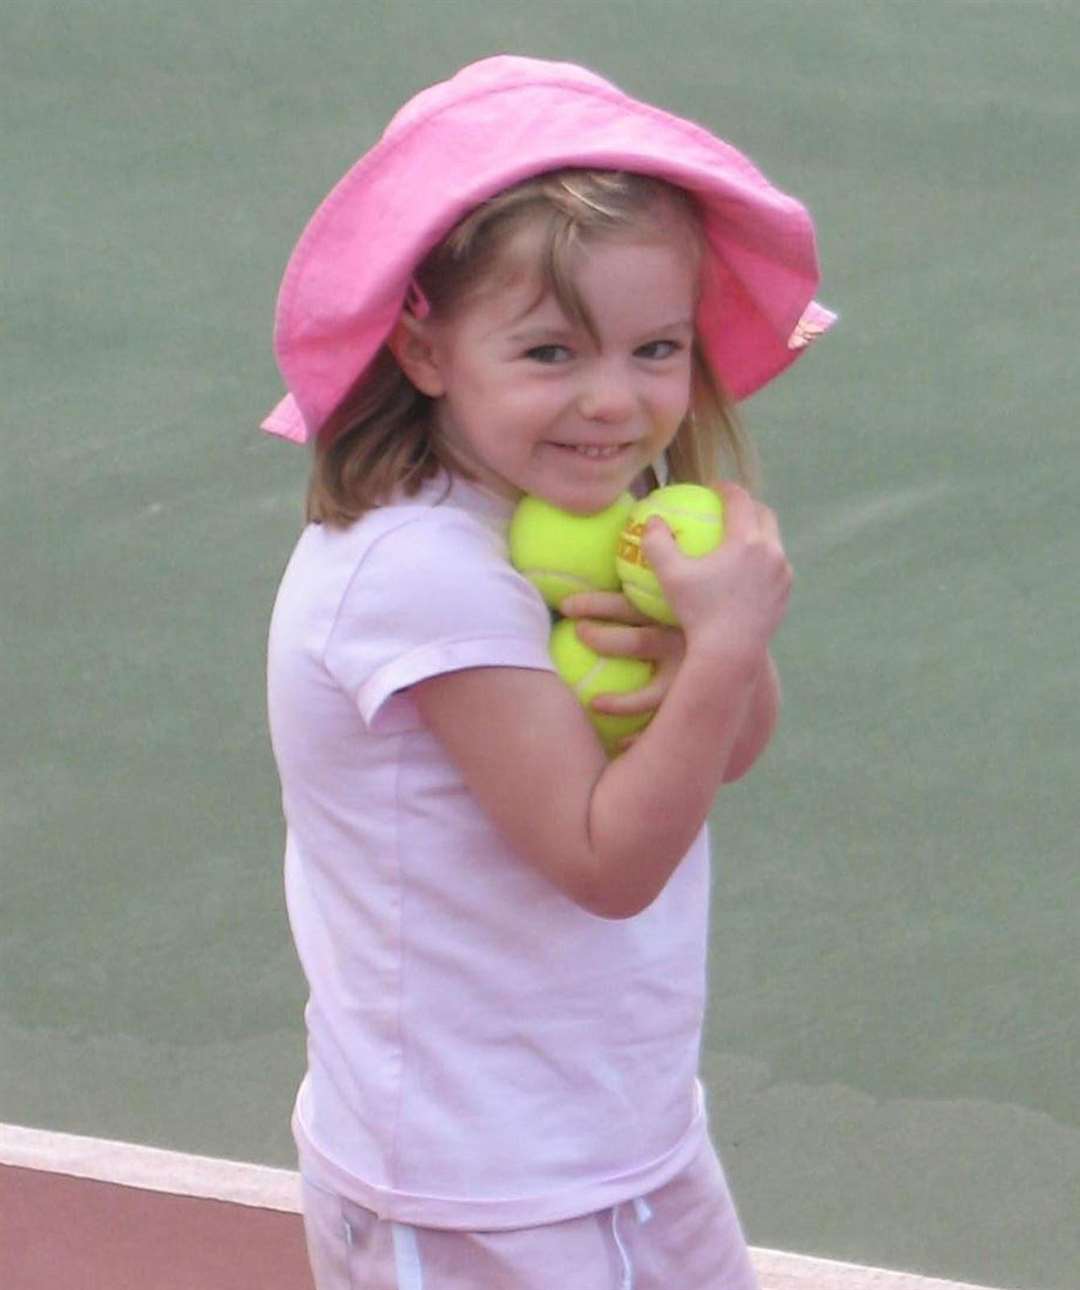 Christian B is the prime suspect behind the disappearance of Madeleine McCann. Photo: PA/PA Wire